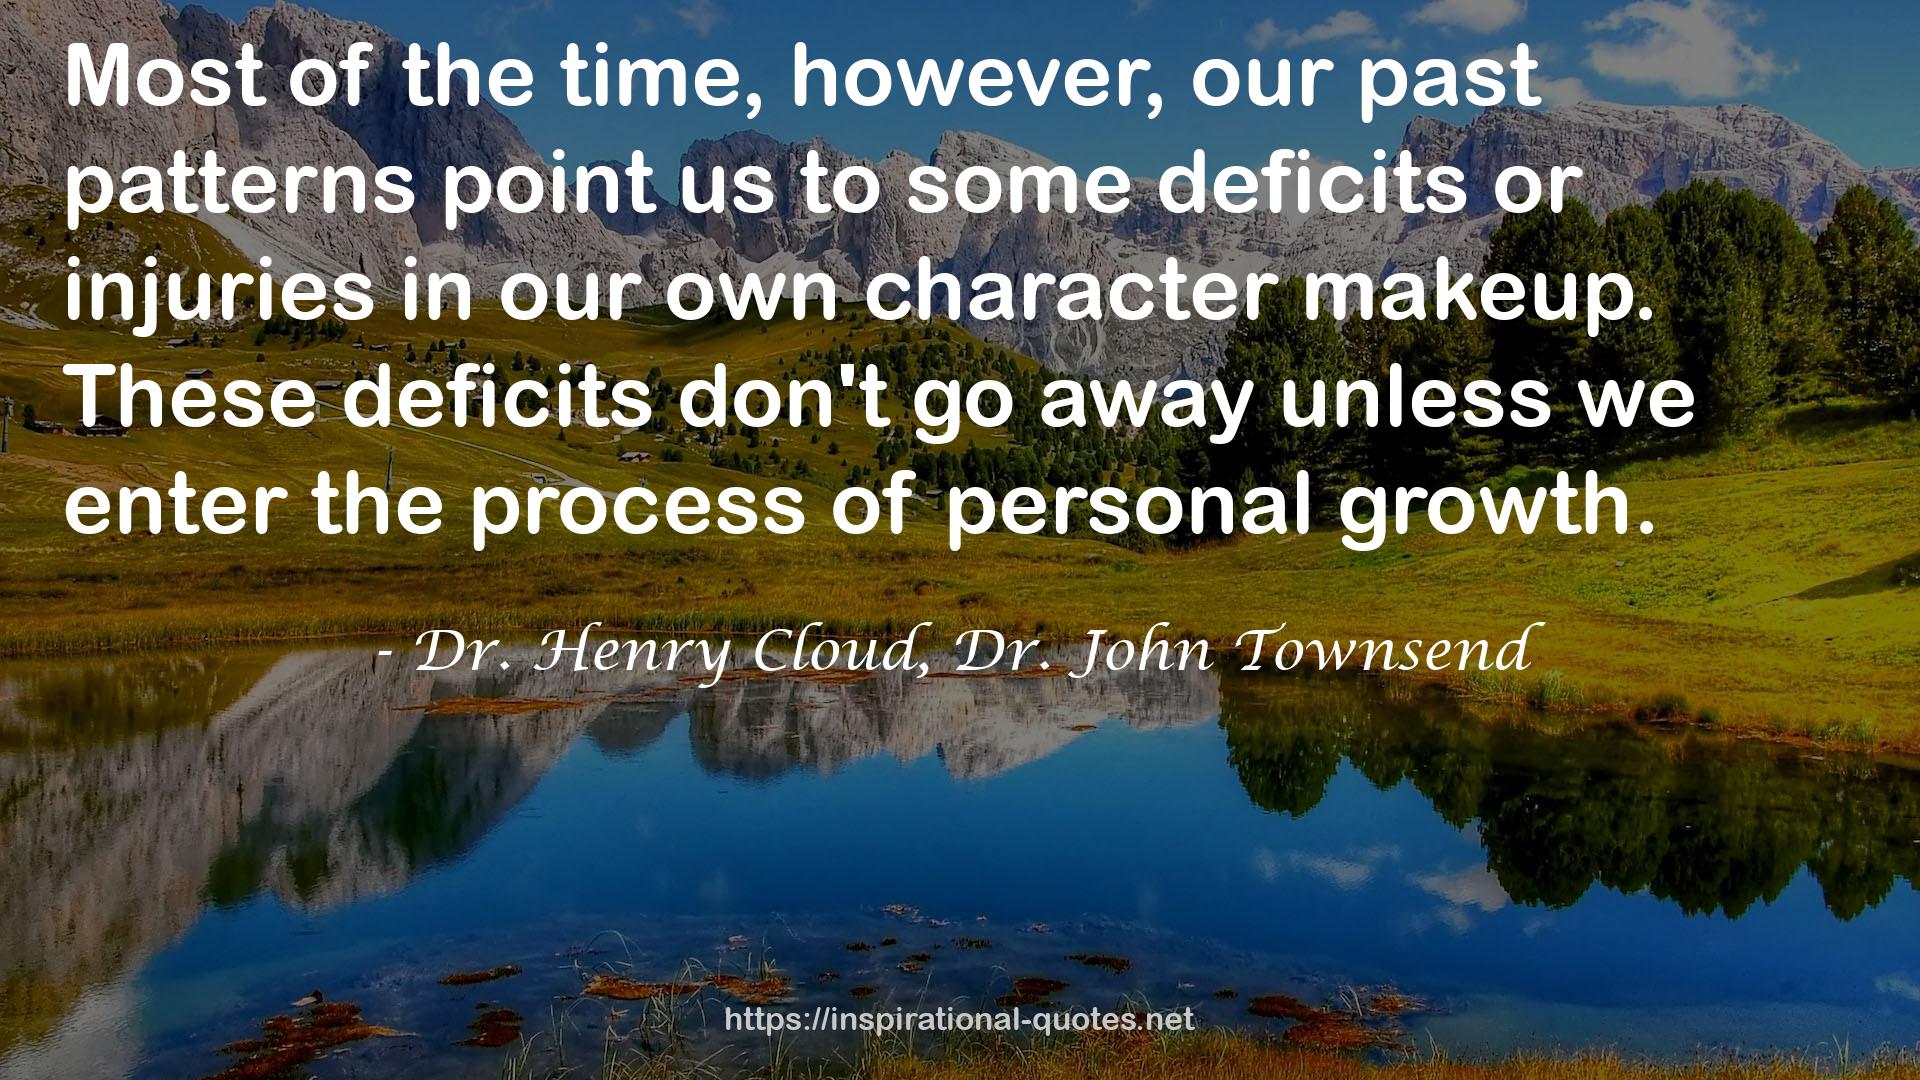 Dr. Henry Cloud, Dr. John Townsend QUOTES